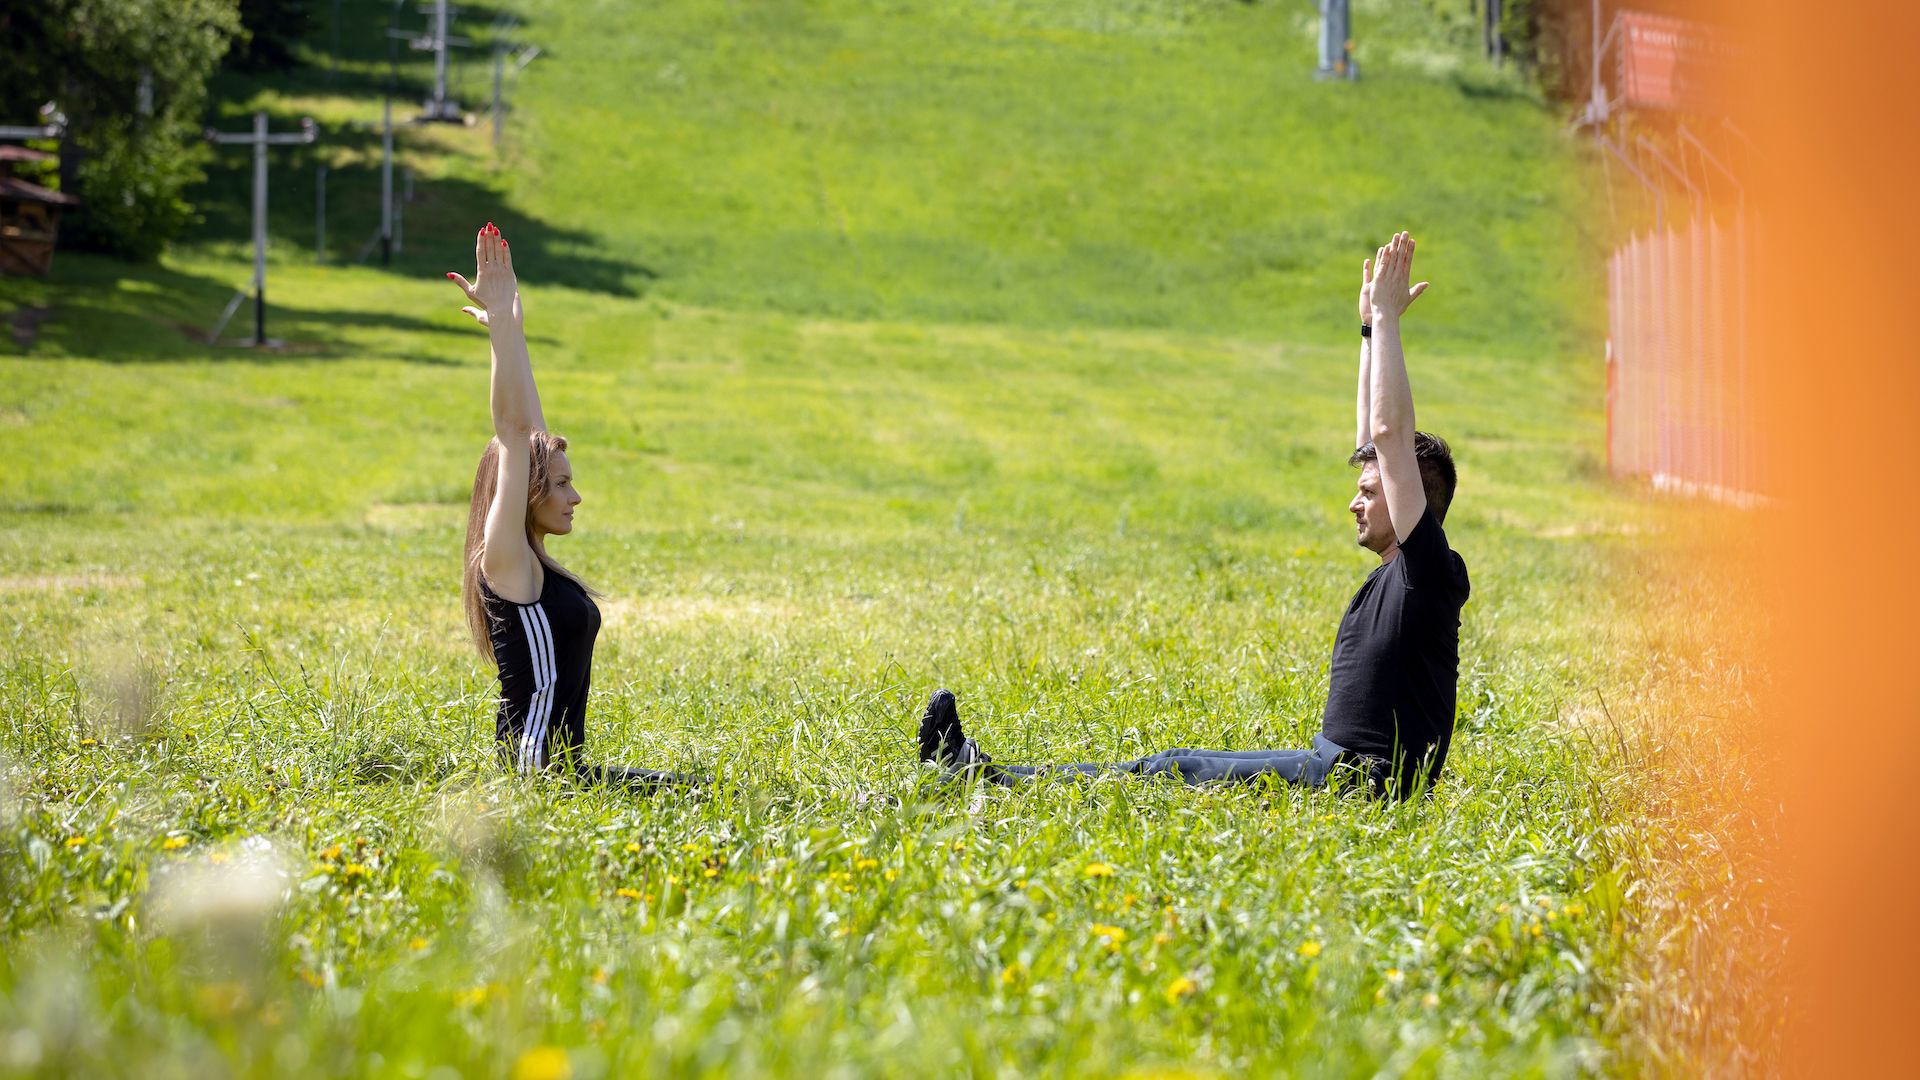 A Man And Woman Doing Yoga In A Grassy Field